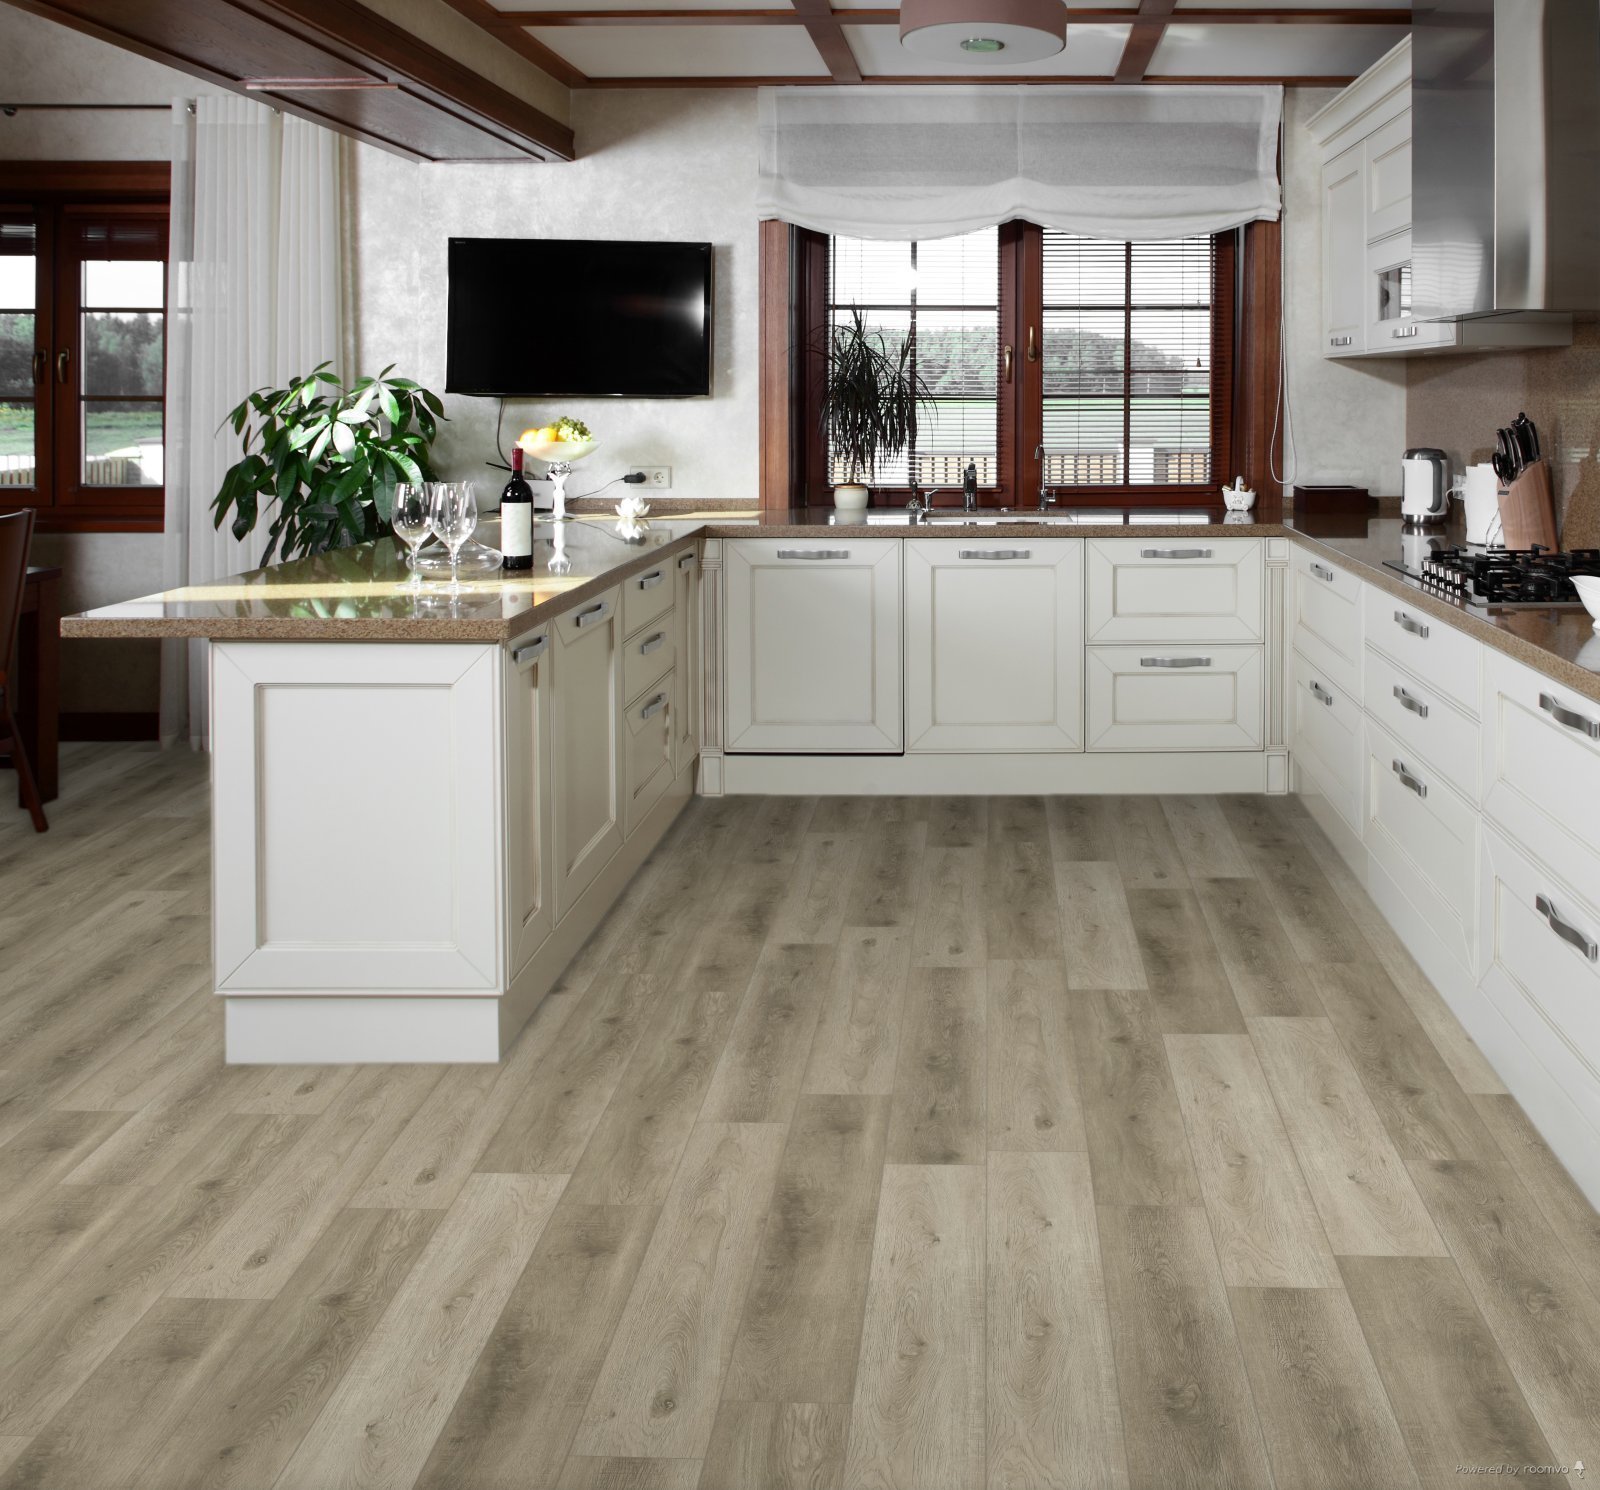 Horizen Flooring presents to you a picture of a quality wide plank Bungalow luxury vinyl plank. NovoCore Premium EIR collection features a wide range of colors & designs that will compliment any interior. Natural wood grain synchronized surface allow for an authentic hardwood look & feel. This collection features a 0.25″ / 6.5 mm overall thickness and a durable 22 mil / 0.55 mm wear layer for residential and commercial applications.